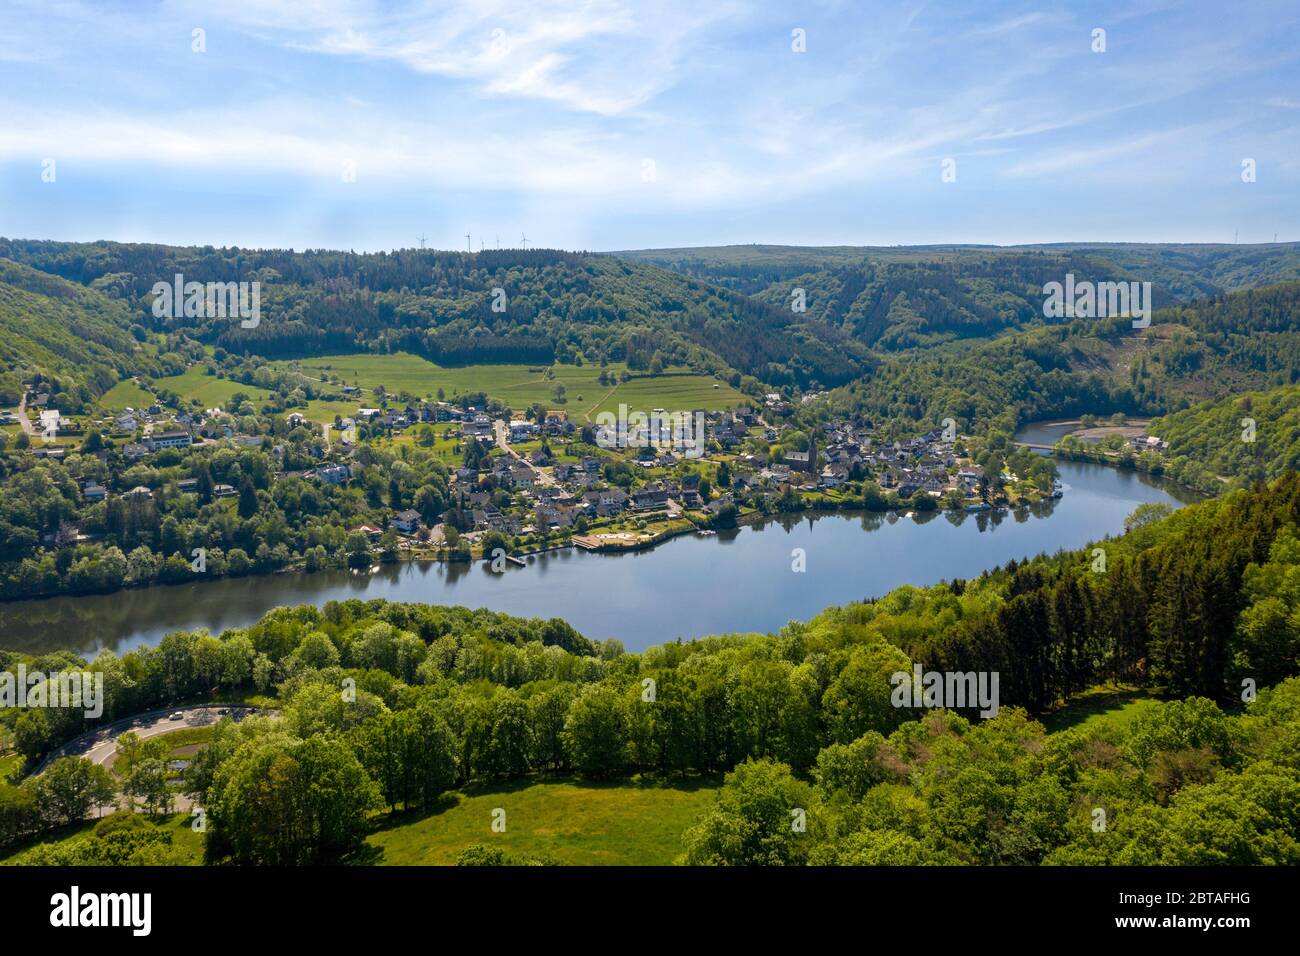 Aerial view of Einruhr, situated on the Obersee (Upper Rursee), a reservoir lake, Simmerath, North Rhine-Westphalia, Germany. Stock Photo